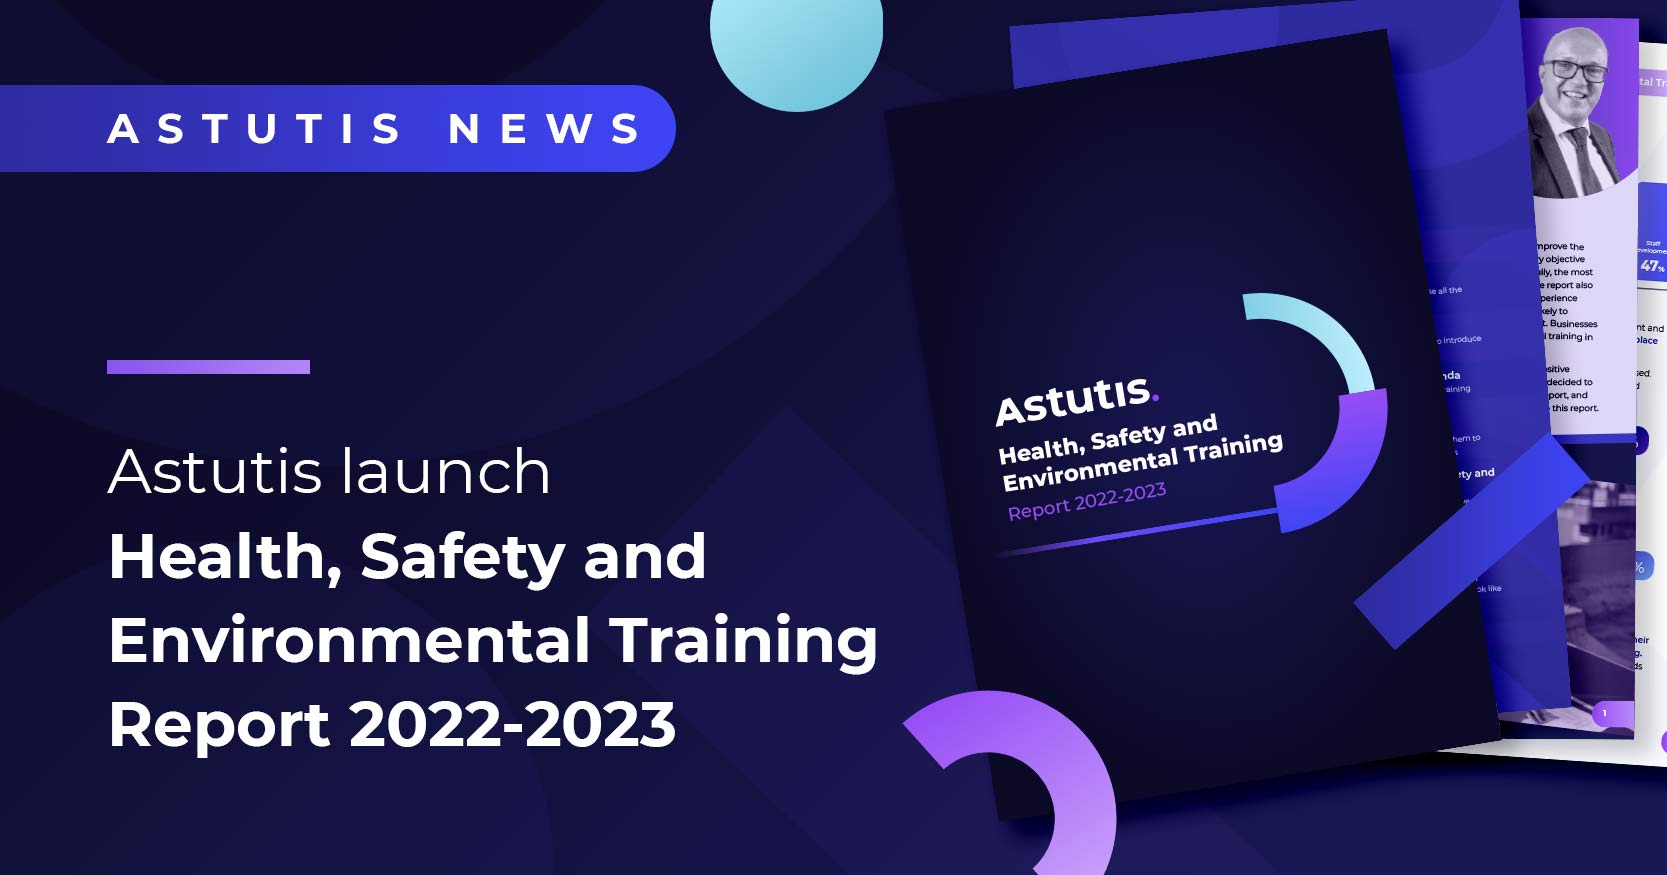 Astutis Launch The Health, Safety and Environmental Training Report 2022-2023 Image